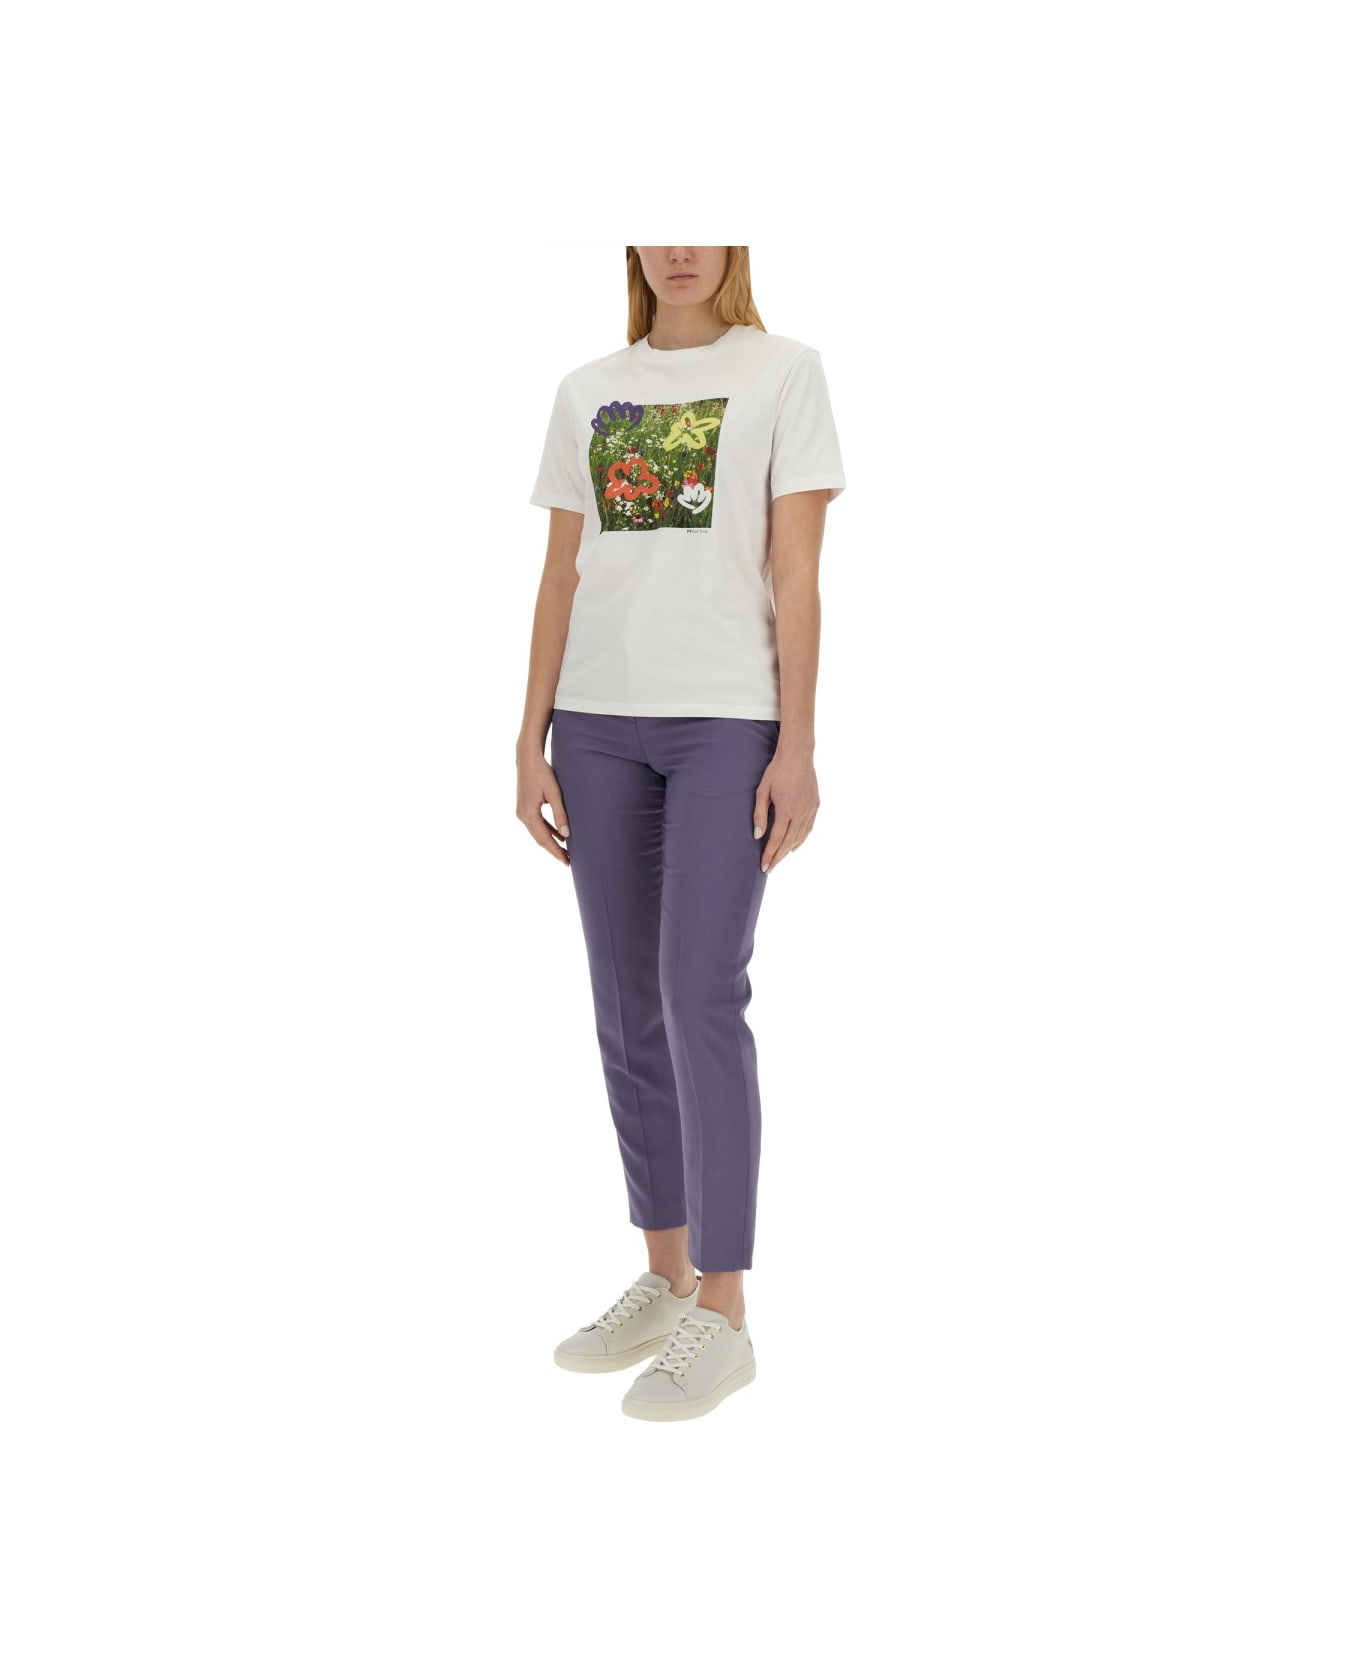 PS by Paul Smith 'wildflowers' T-shirt - WHITE Tシャツ